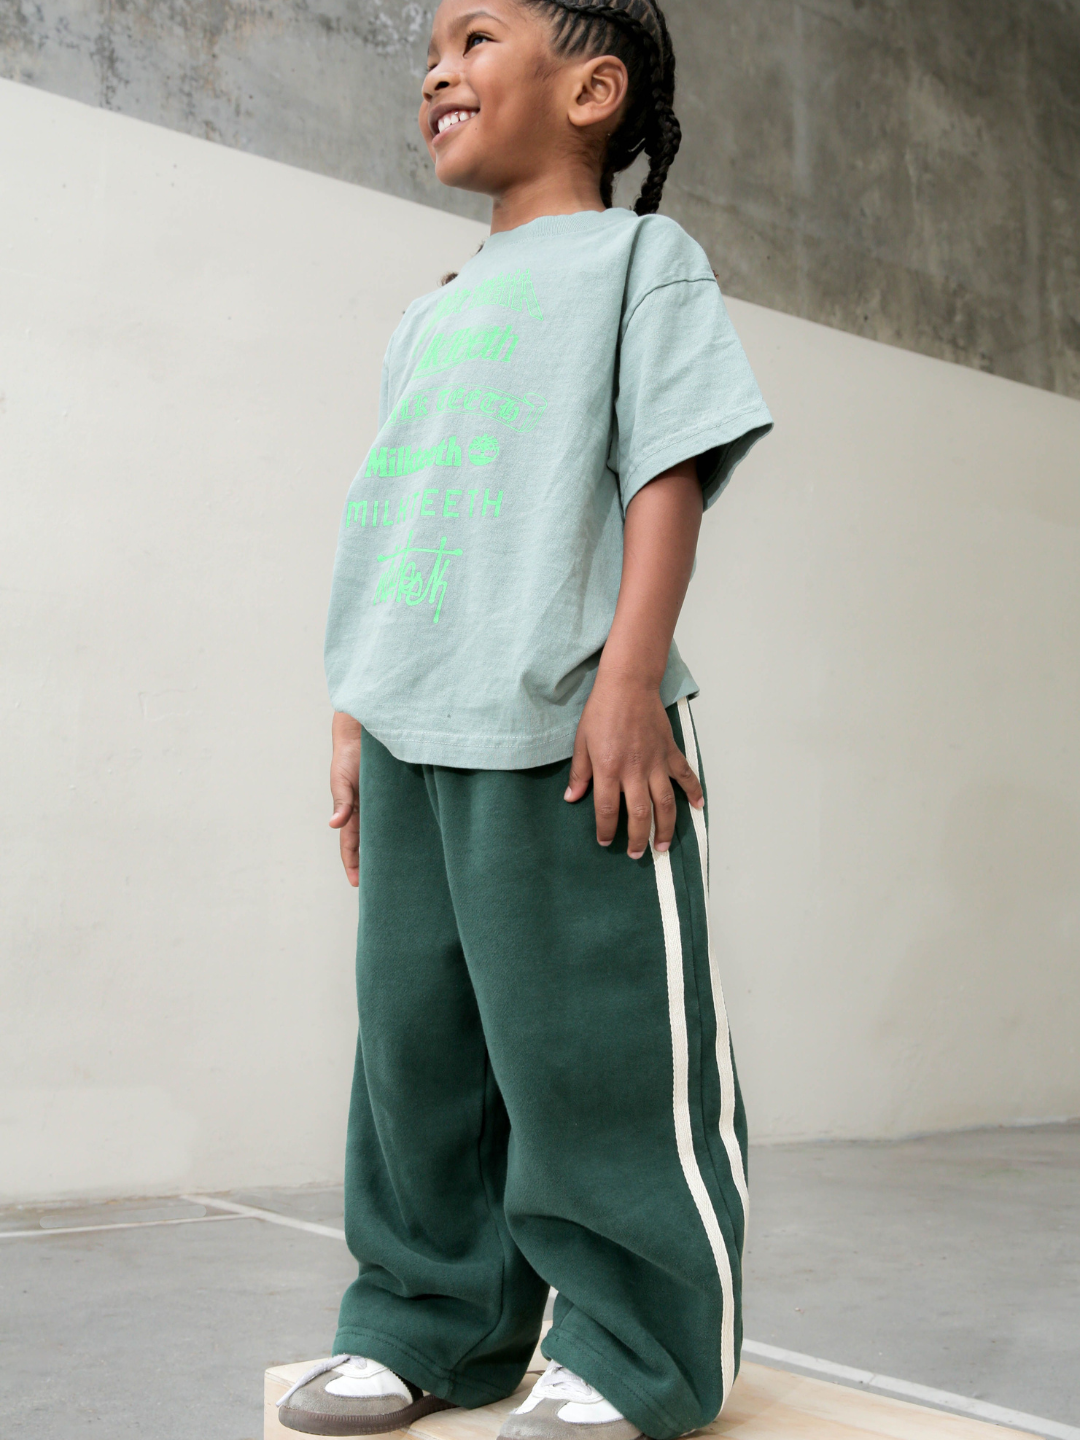 Hunter | Child wearig the varsity track pants in hunter green with white stripes down the side. He wears his hair in braids, a light green t-shirt with neon green Milk Teeth lettering, and white and grey sneakers. He is smiling and standing on a wooden box on a grey concrete playground.